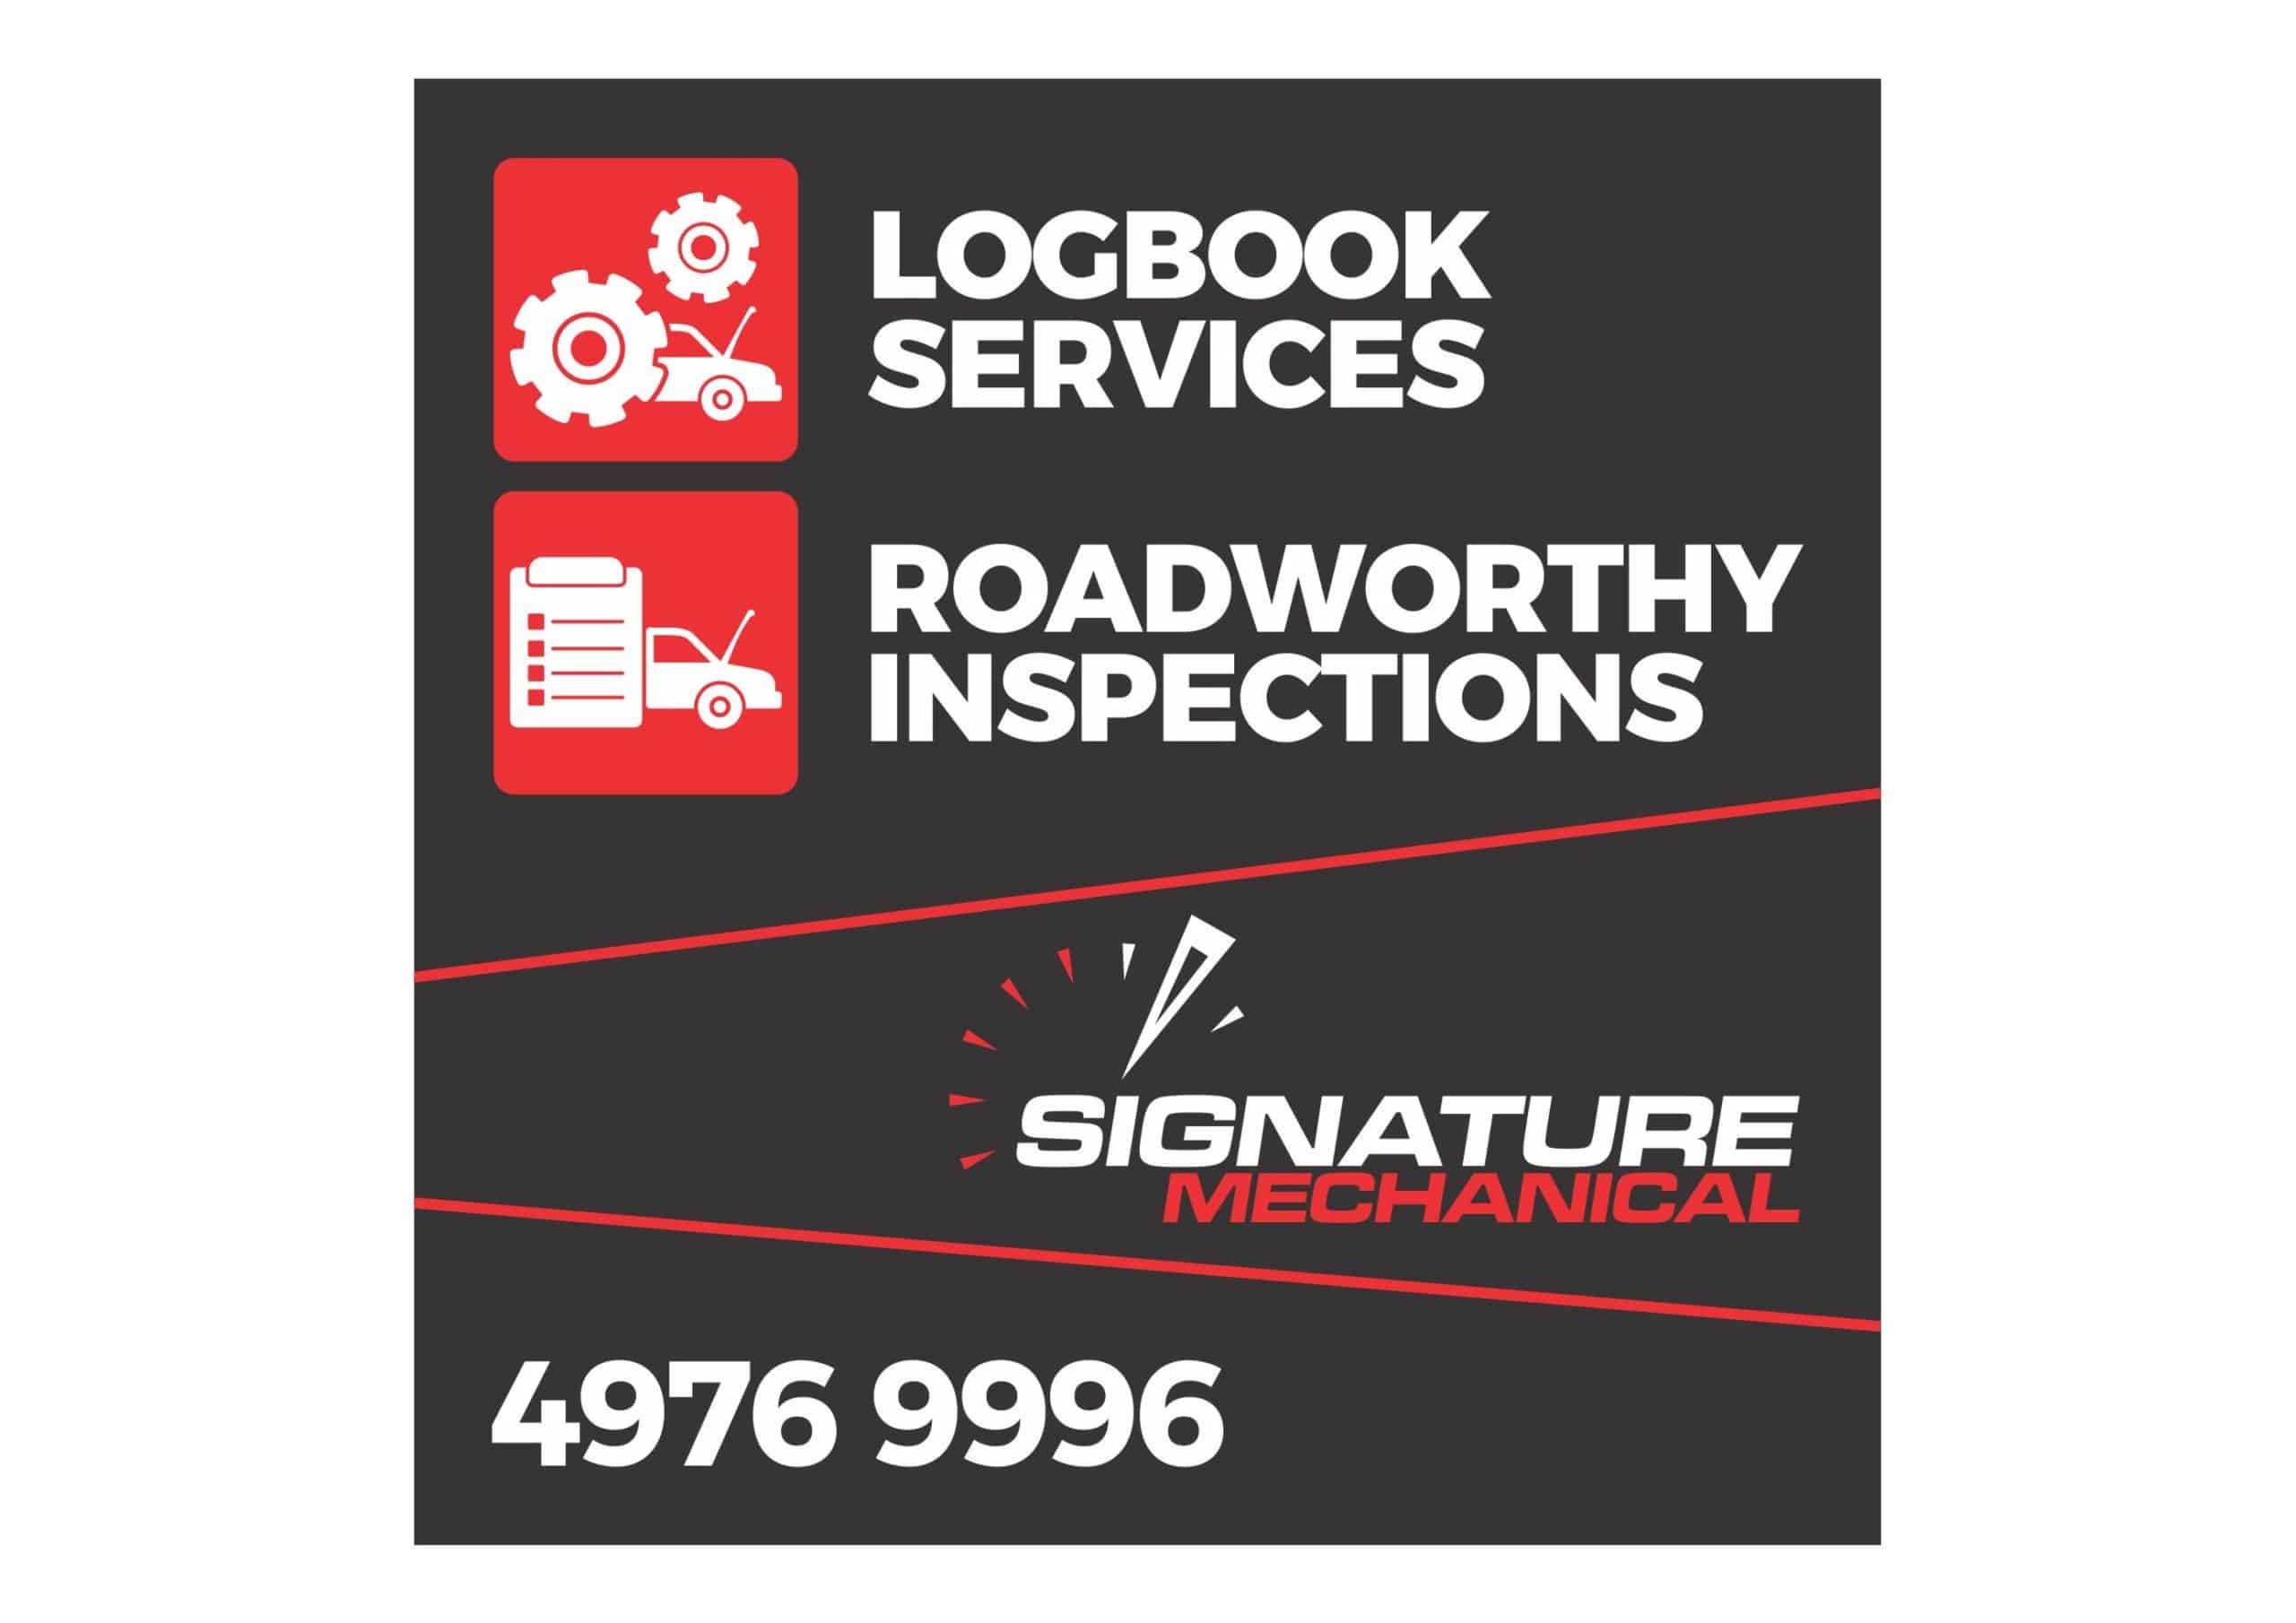 3 Common Reasons for Failing a Roadworthy Inspection